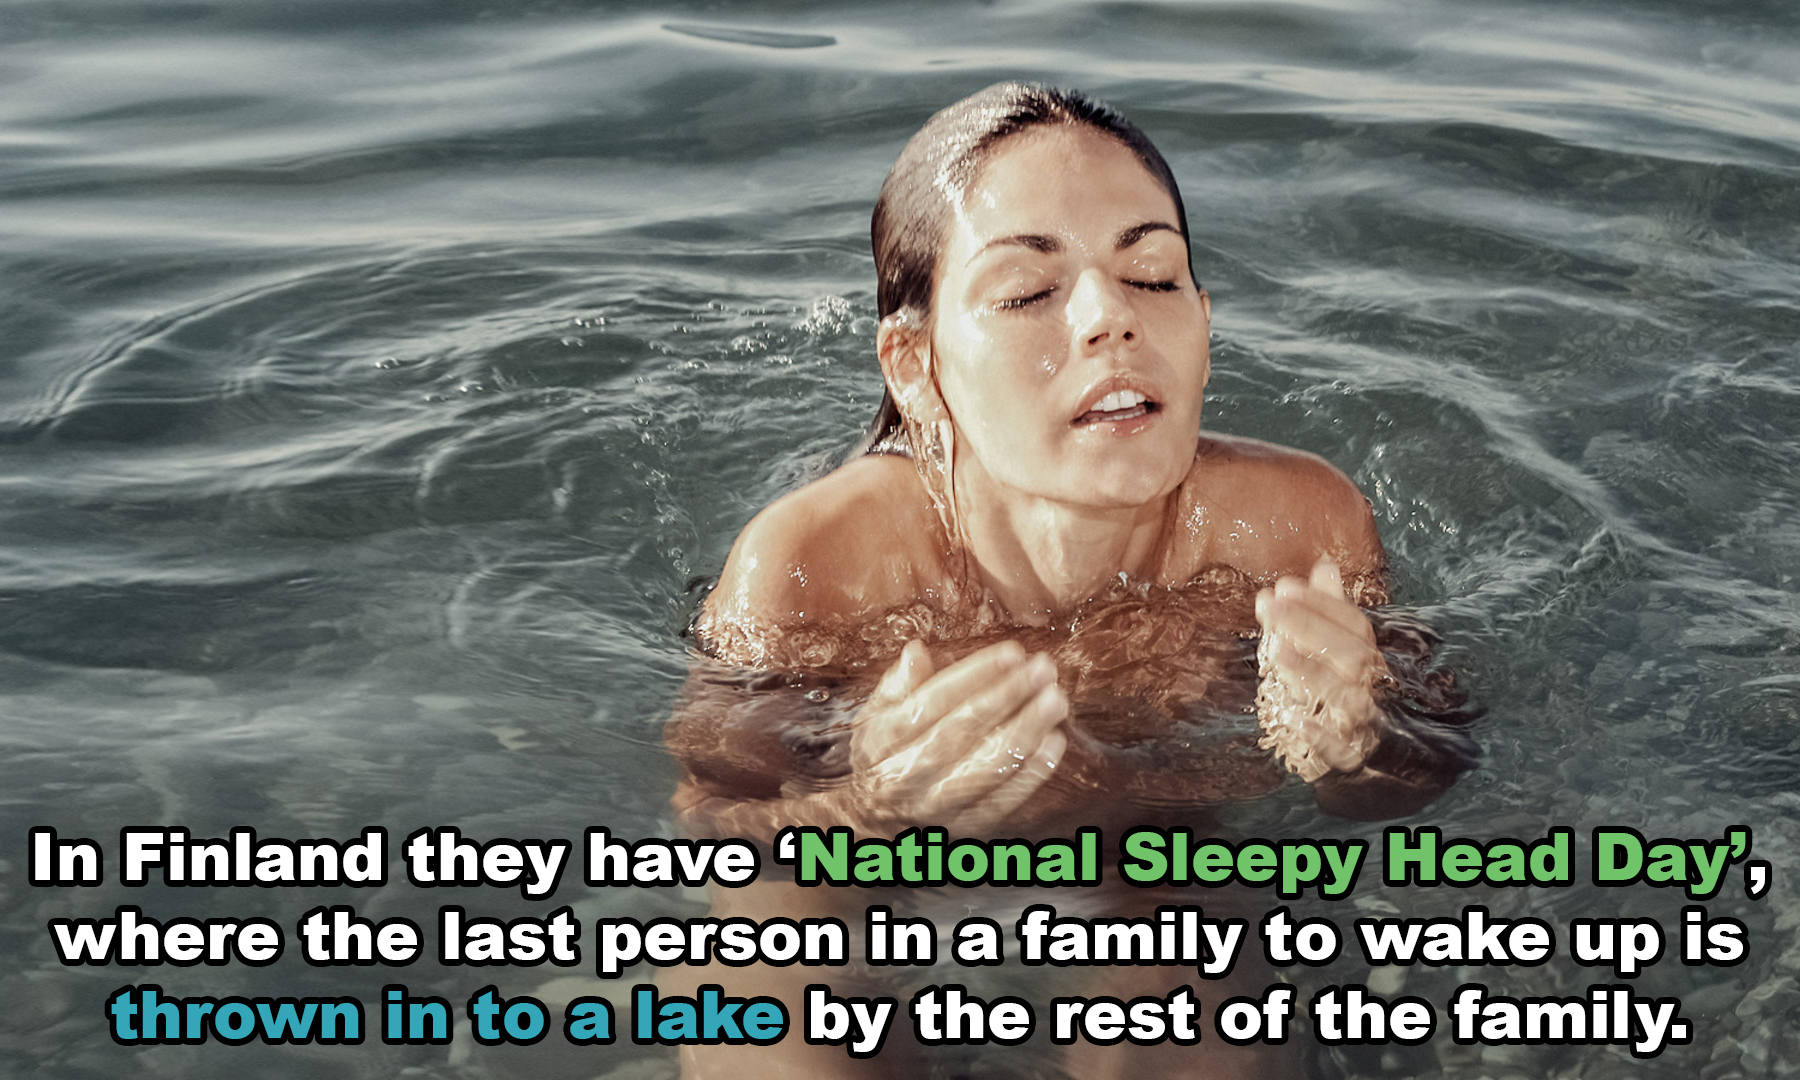 water - In Finland they have 'National Sleepy Head Day, where the last person in a family to wake up is thrown in to a lake by the rest of the family.